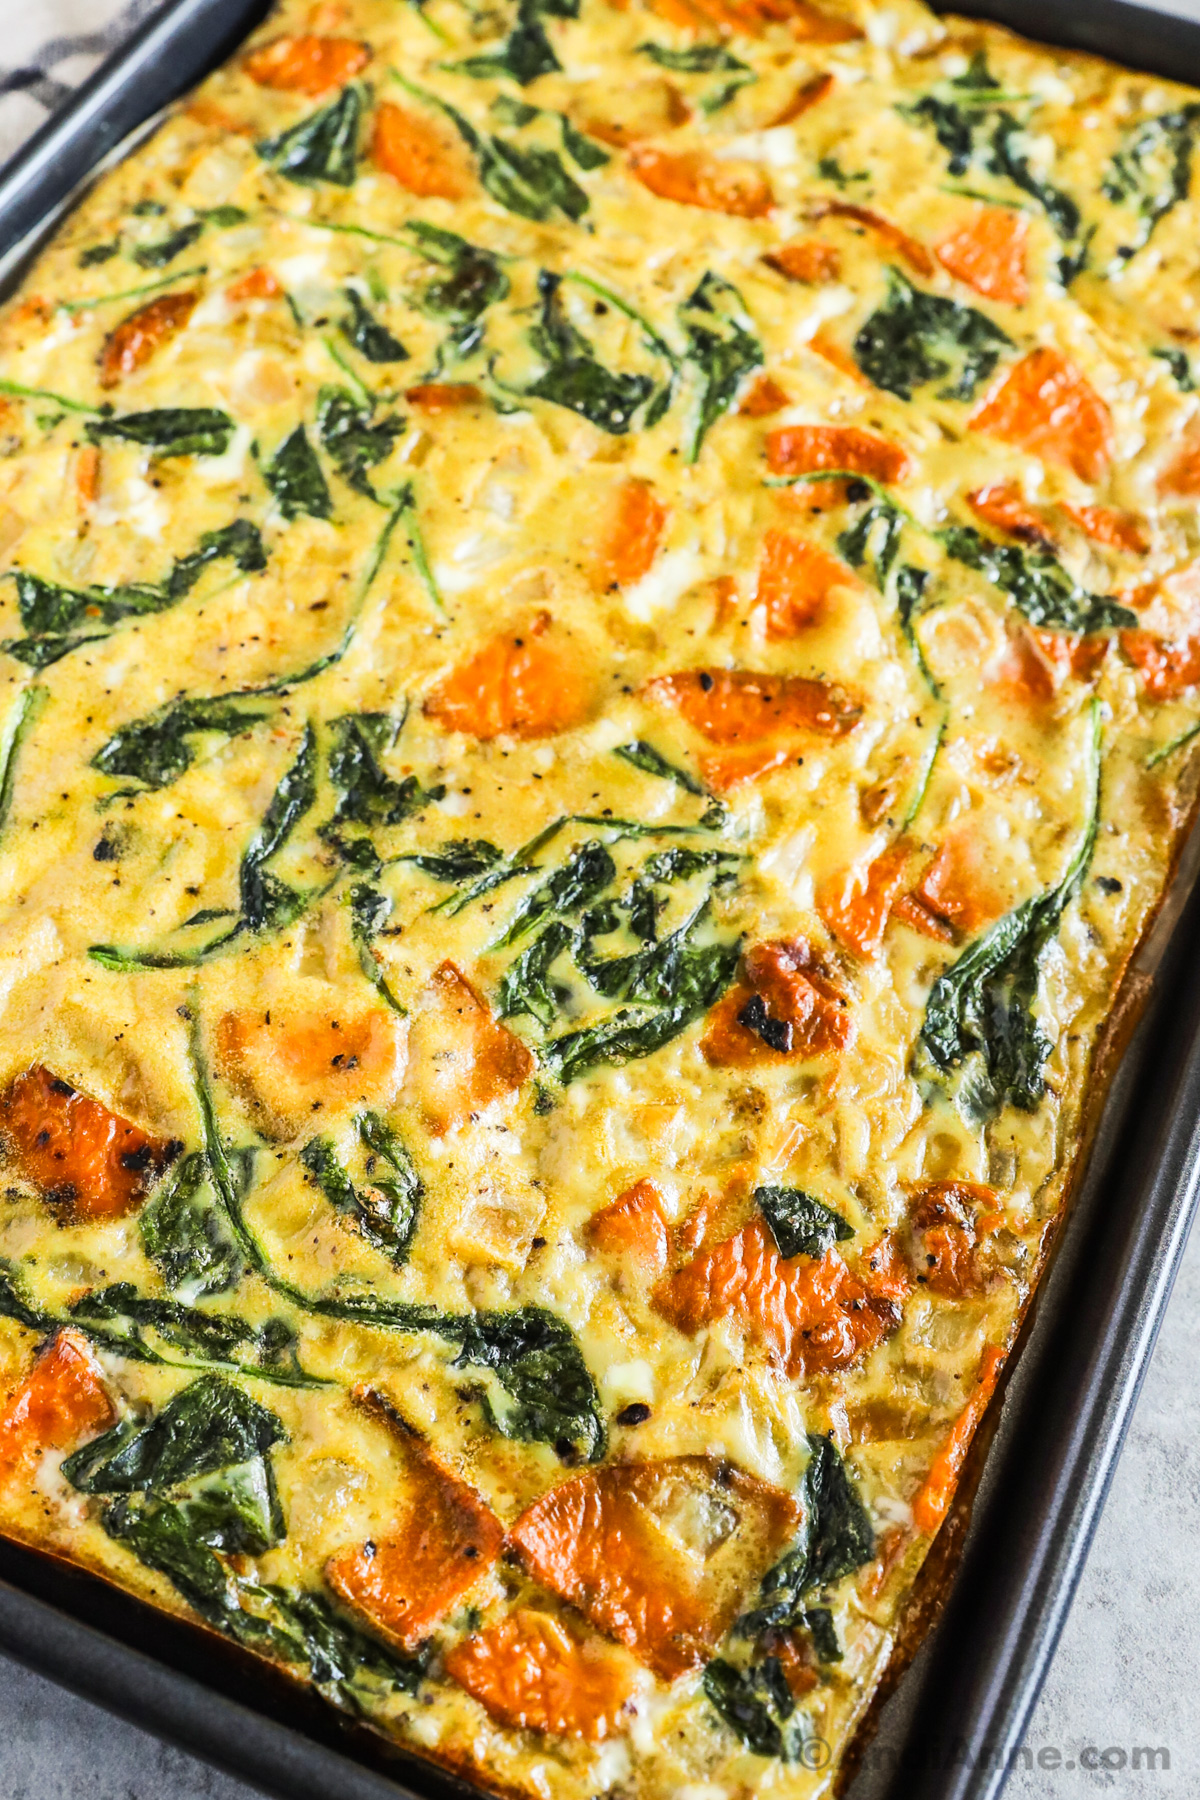 Close up of a large omelette with sweet potato slices and spinach.